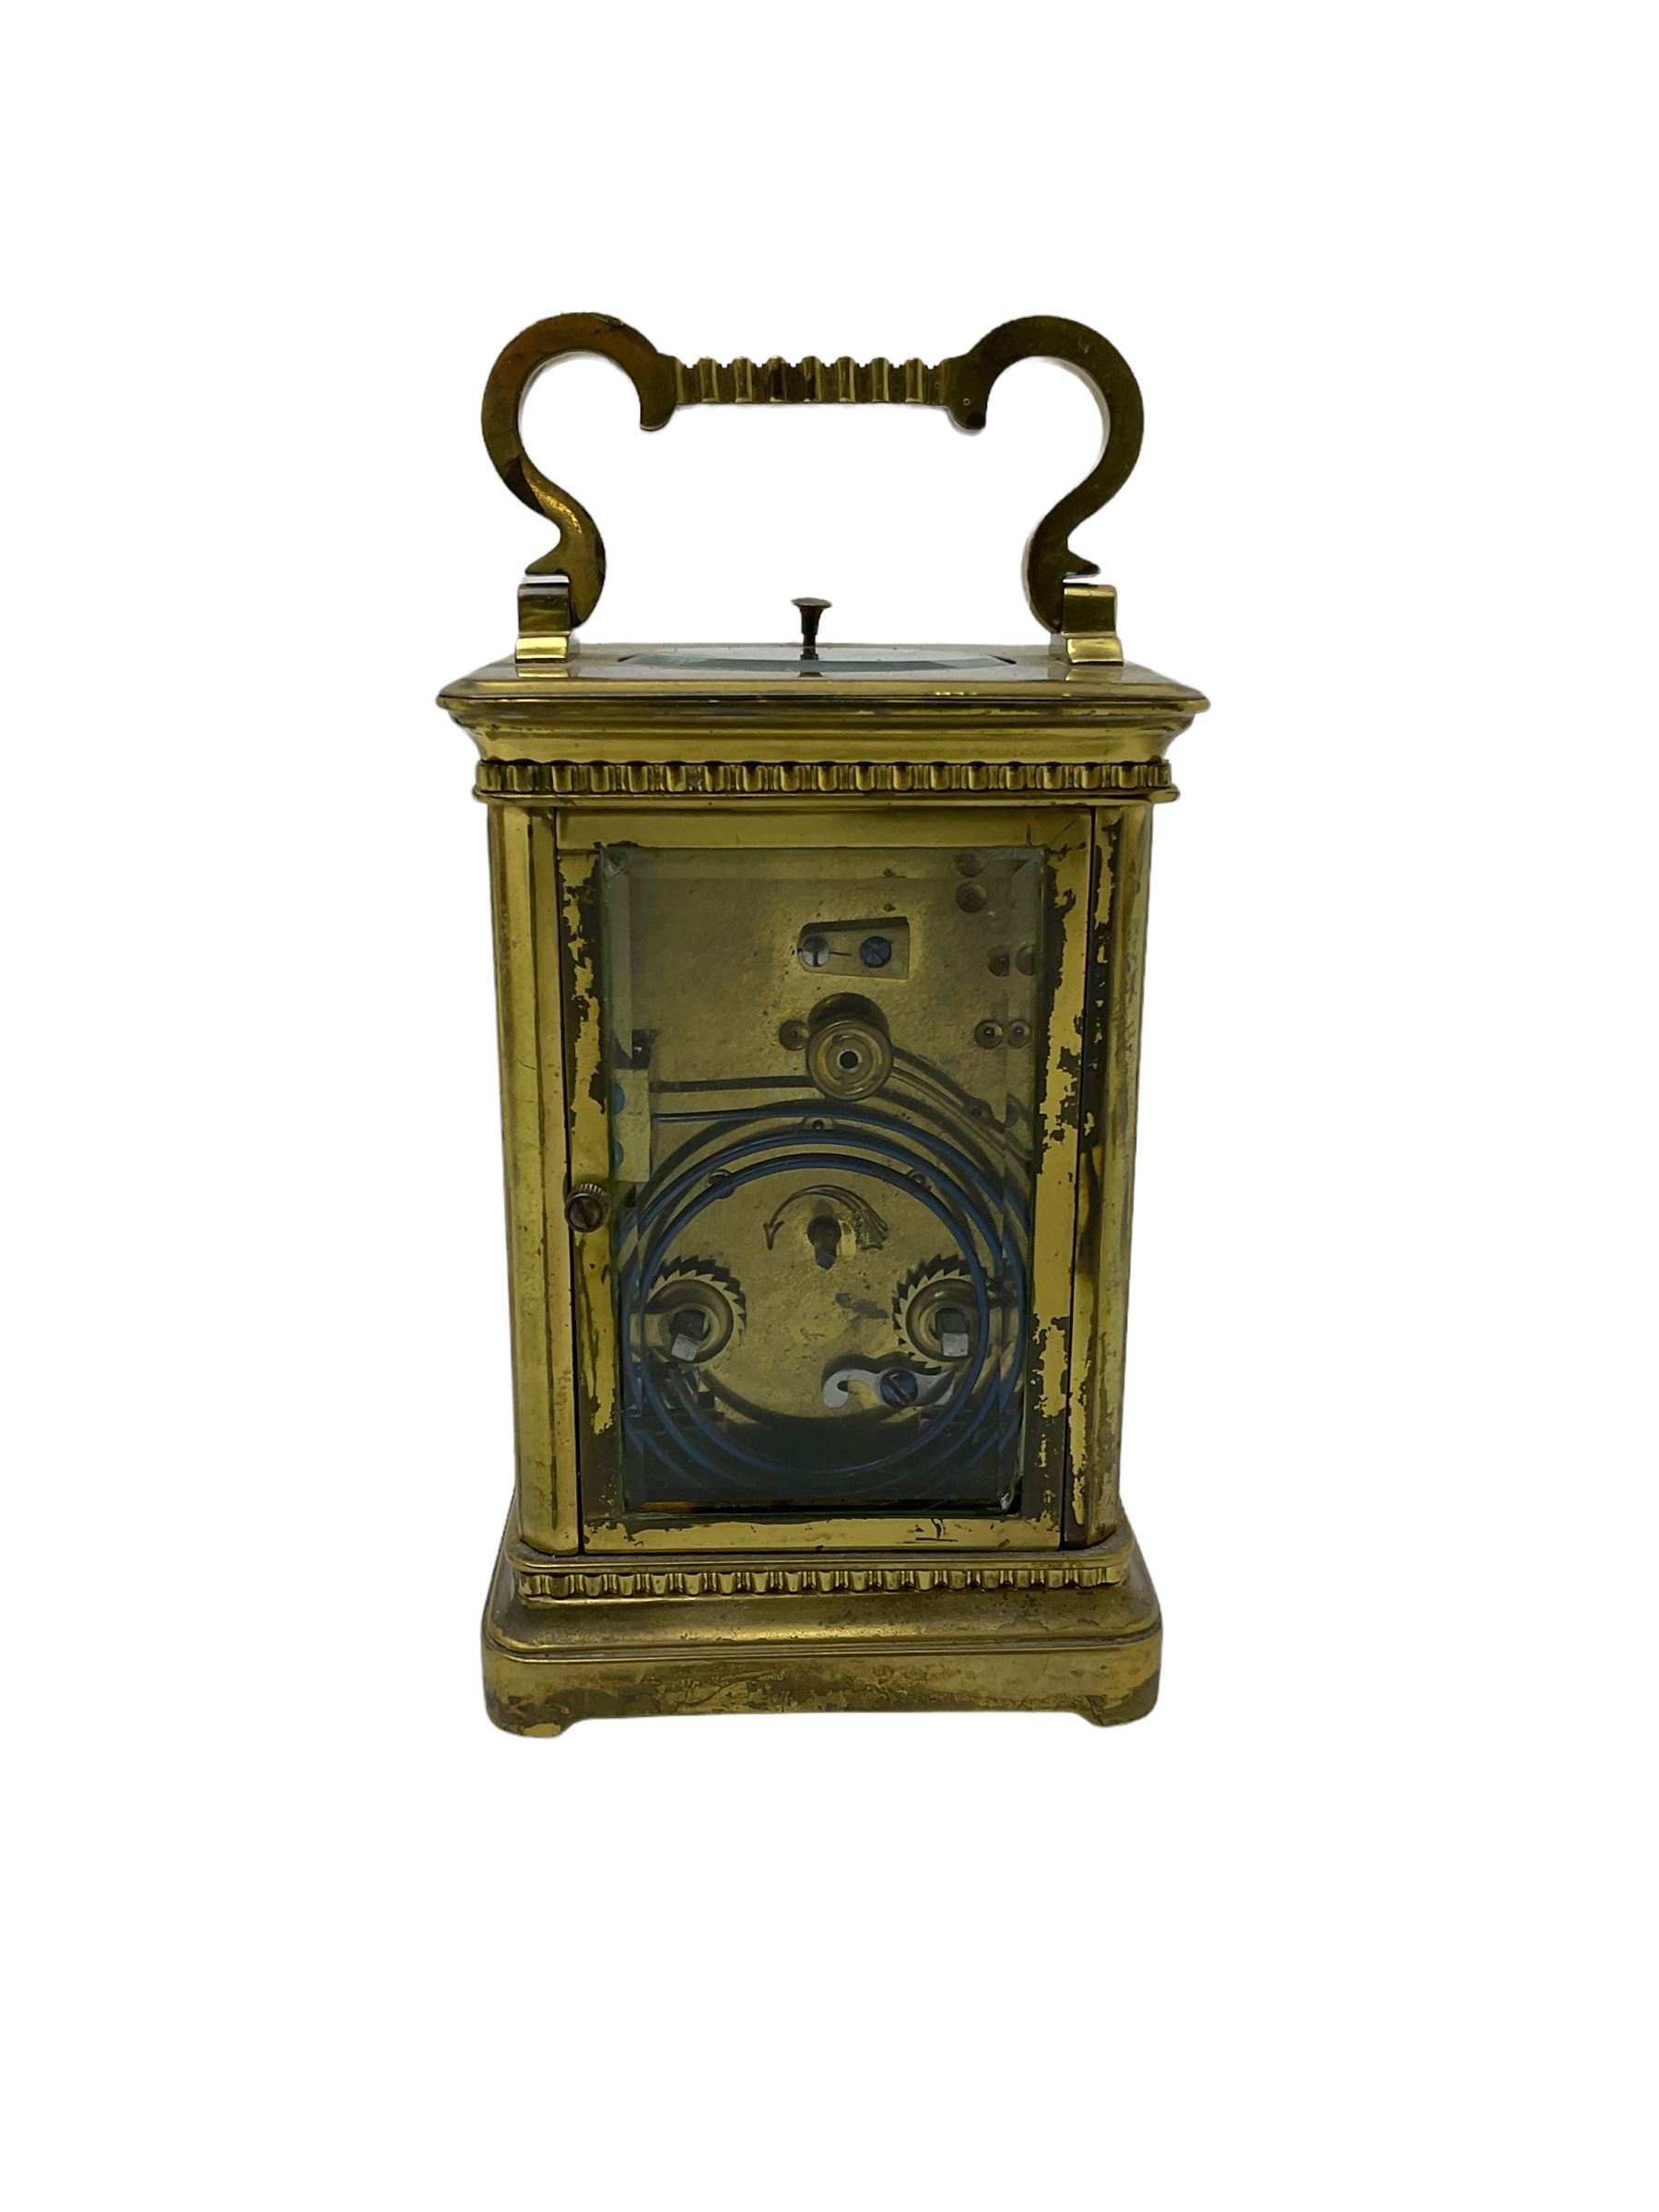 French carriage clock c1910 with strike and repeat work in a corniche case with beadwork - Image 5 of 6